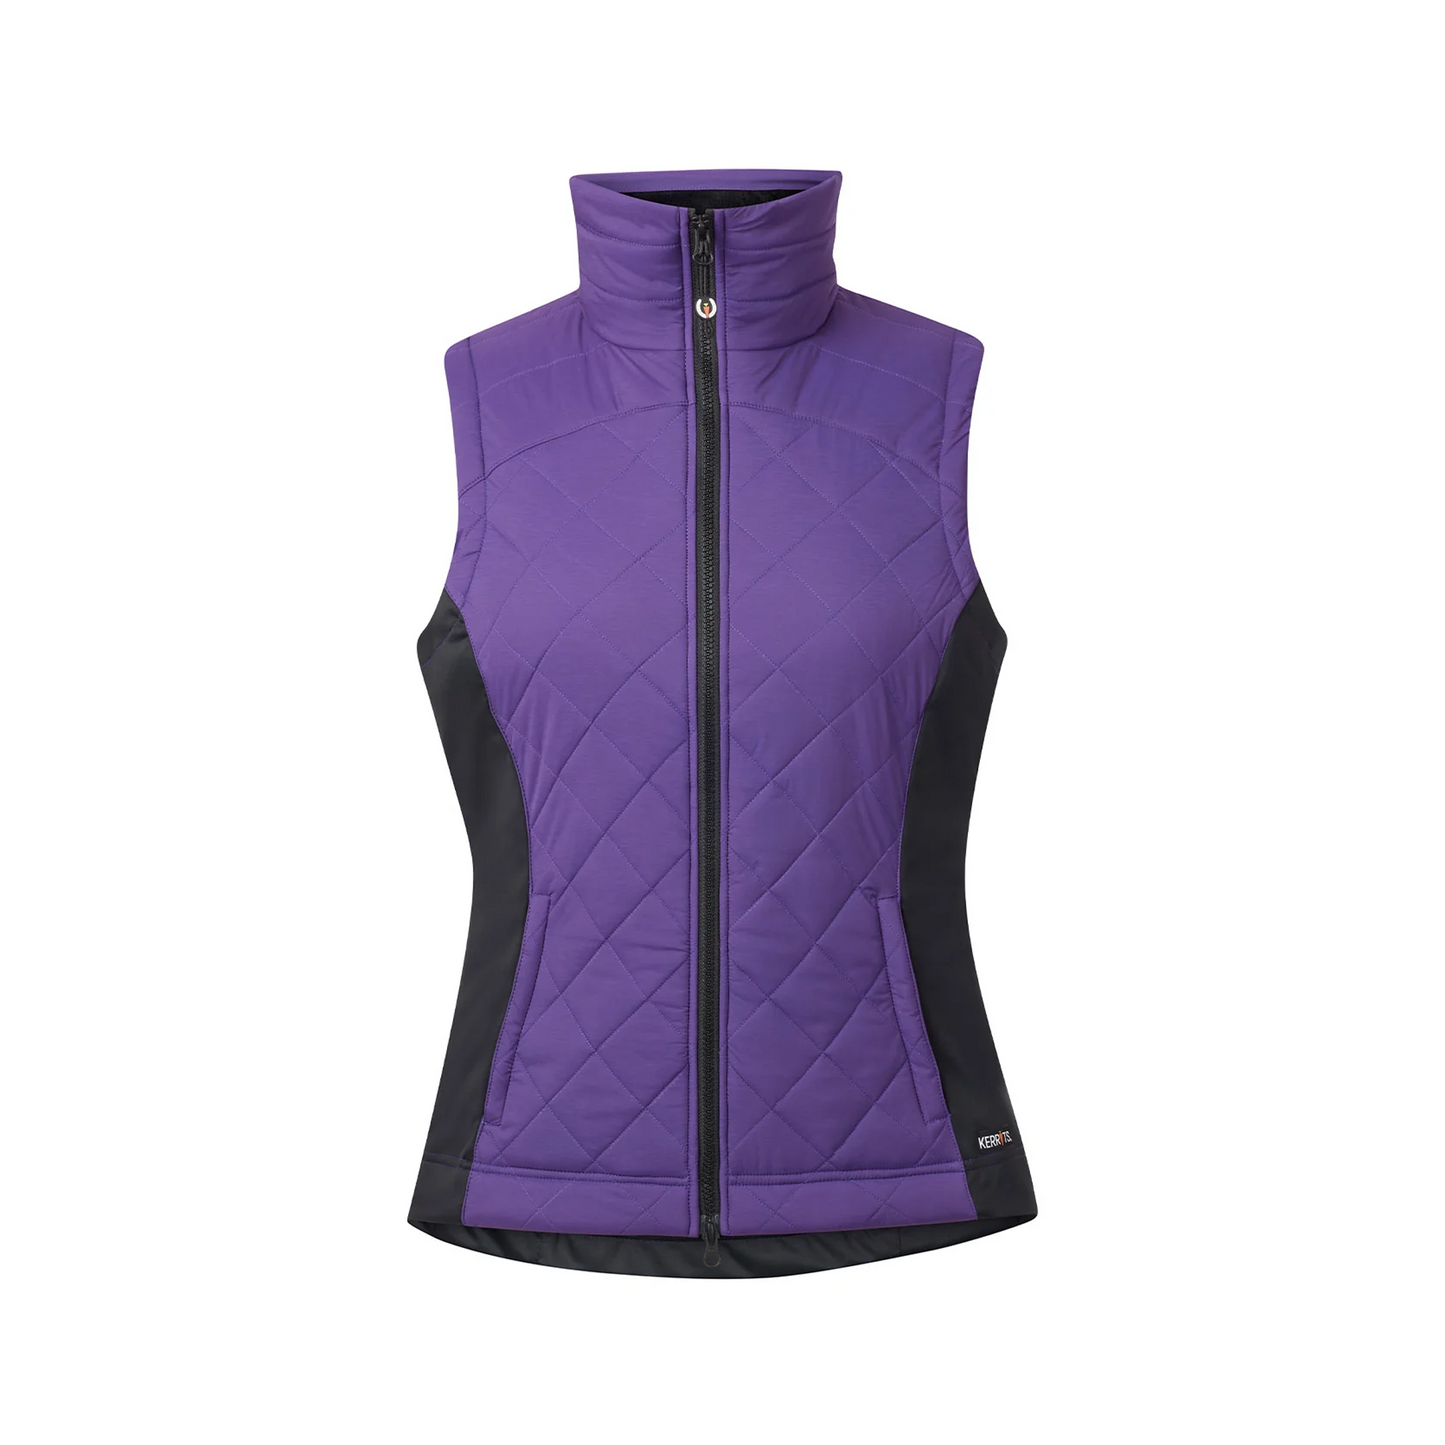 Full Motion Quilted Riding Vest